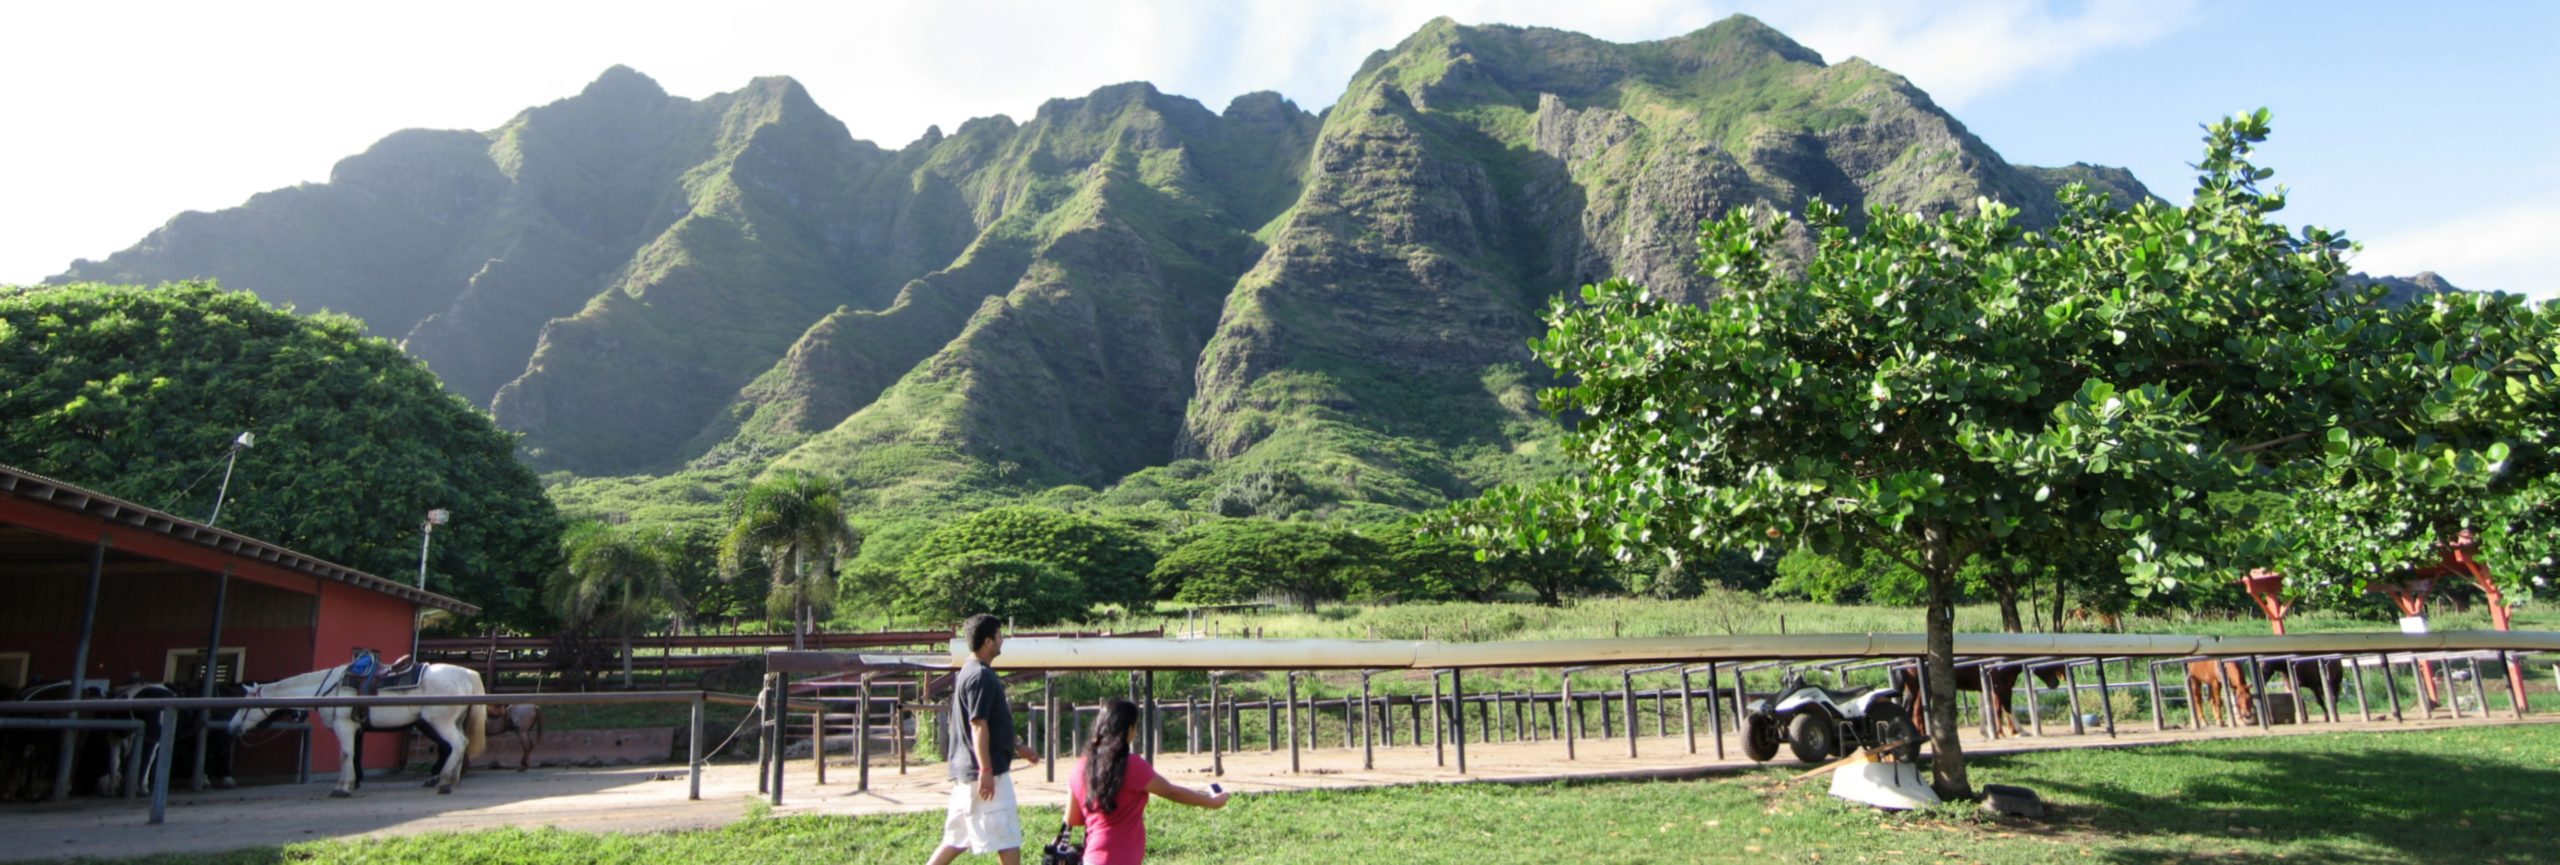 the view of Kualoa Ranch Near the visitor center 